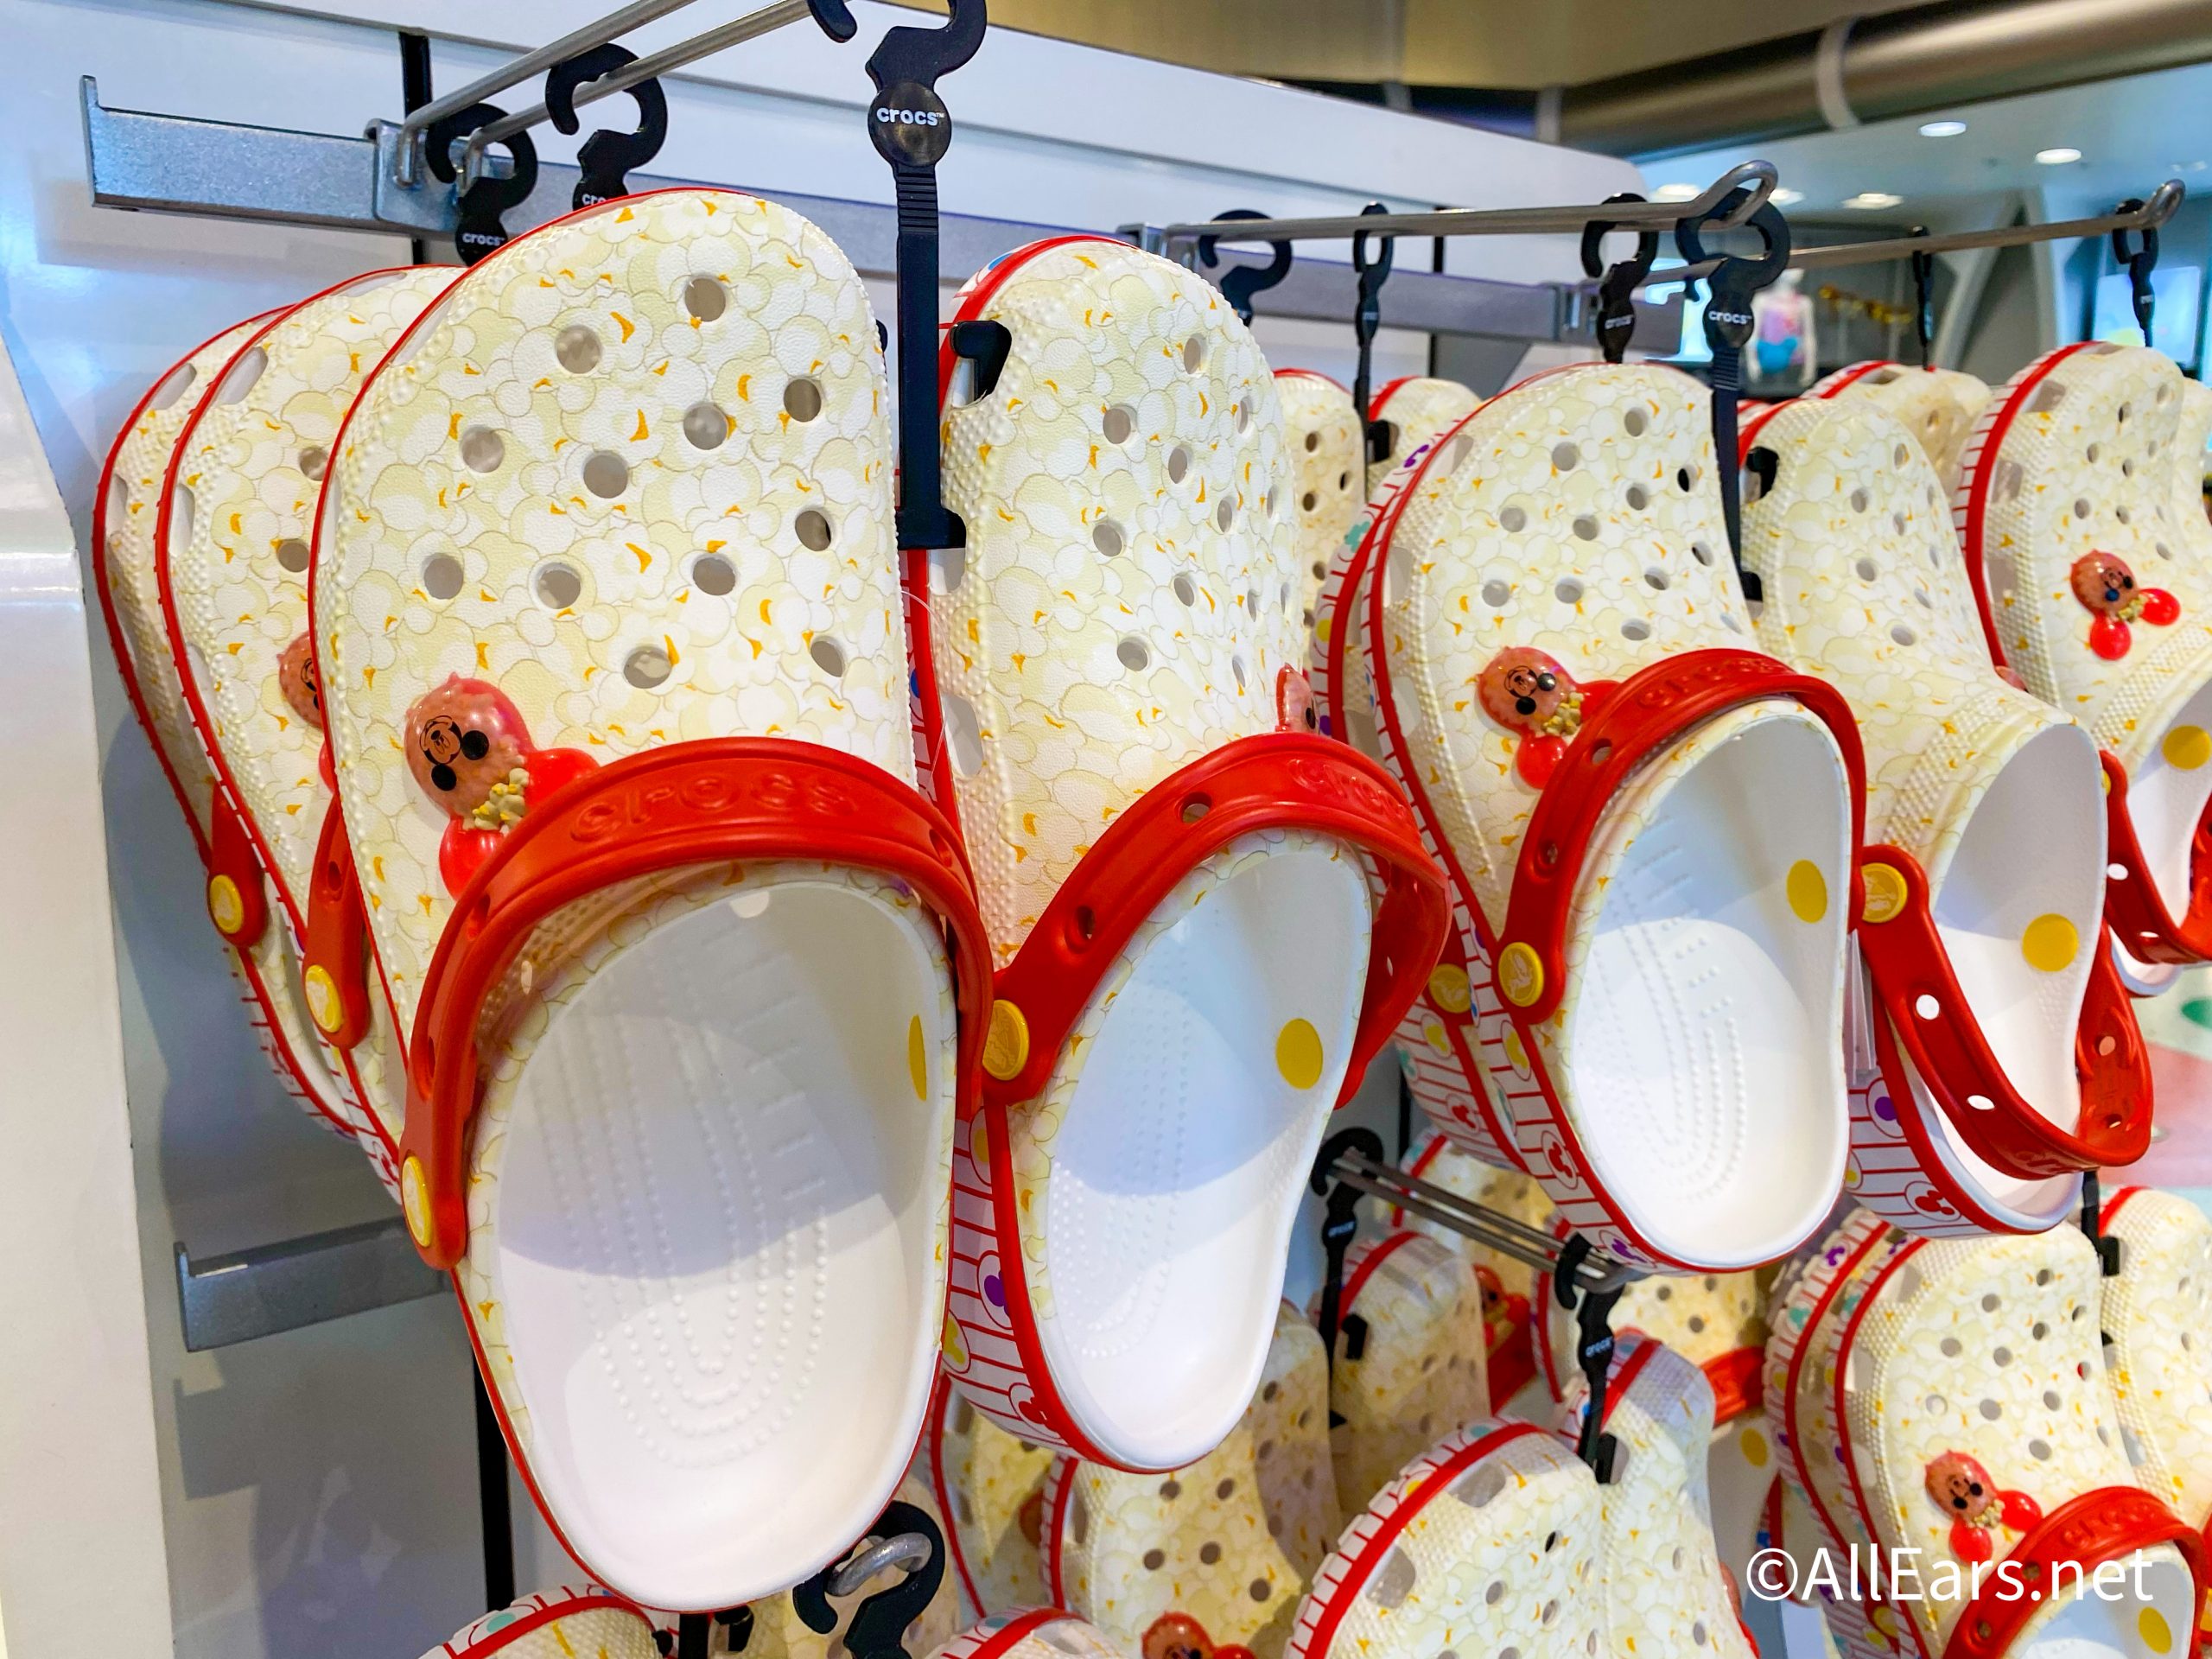 PHOTOS: Check Out the Latest Pair of Snack-Themed Crocs in Disney World! -  AllEars.Net